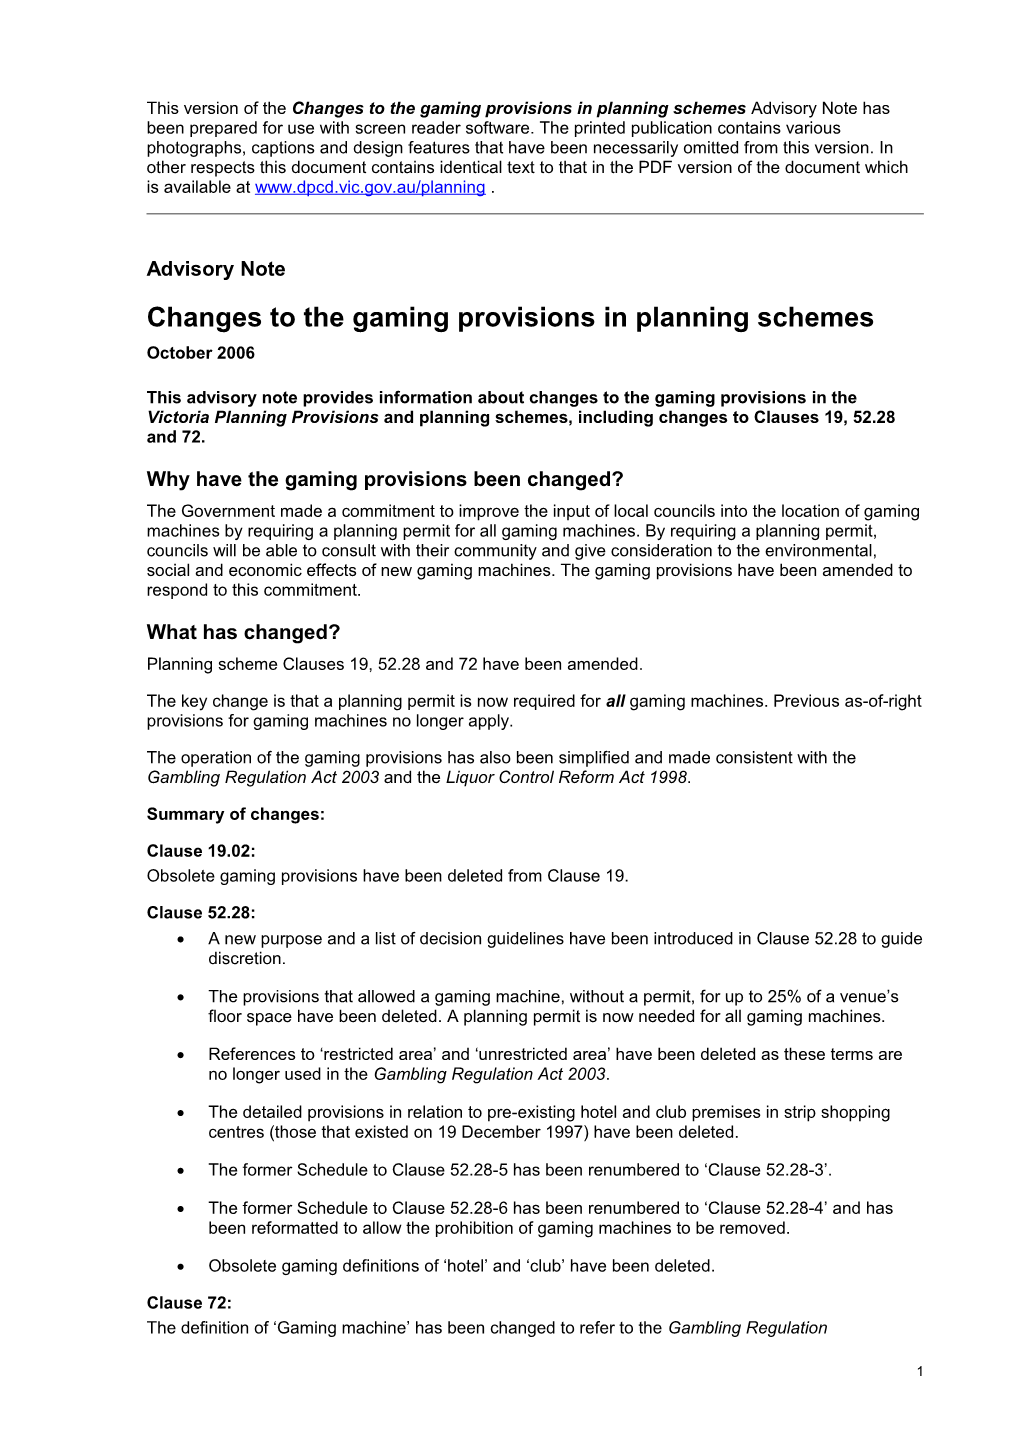 Changes to the Gaming Provisions in Planning Schemes Advisory Note